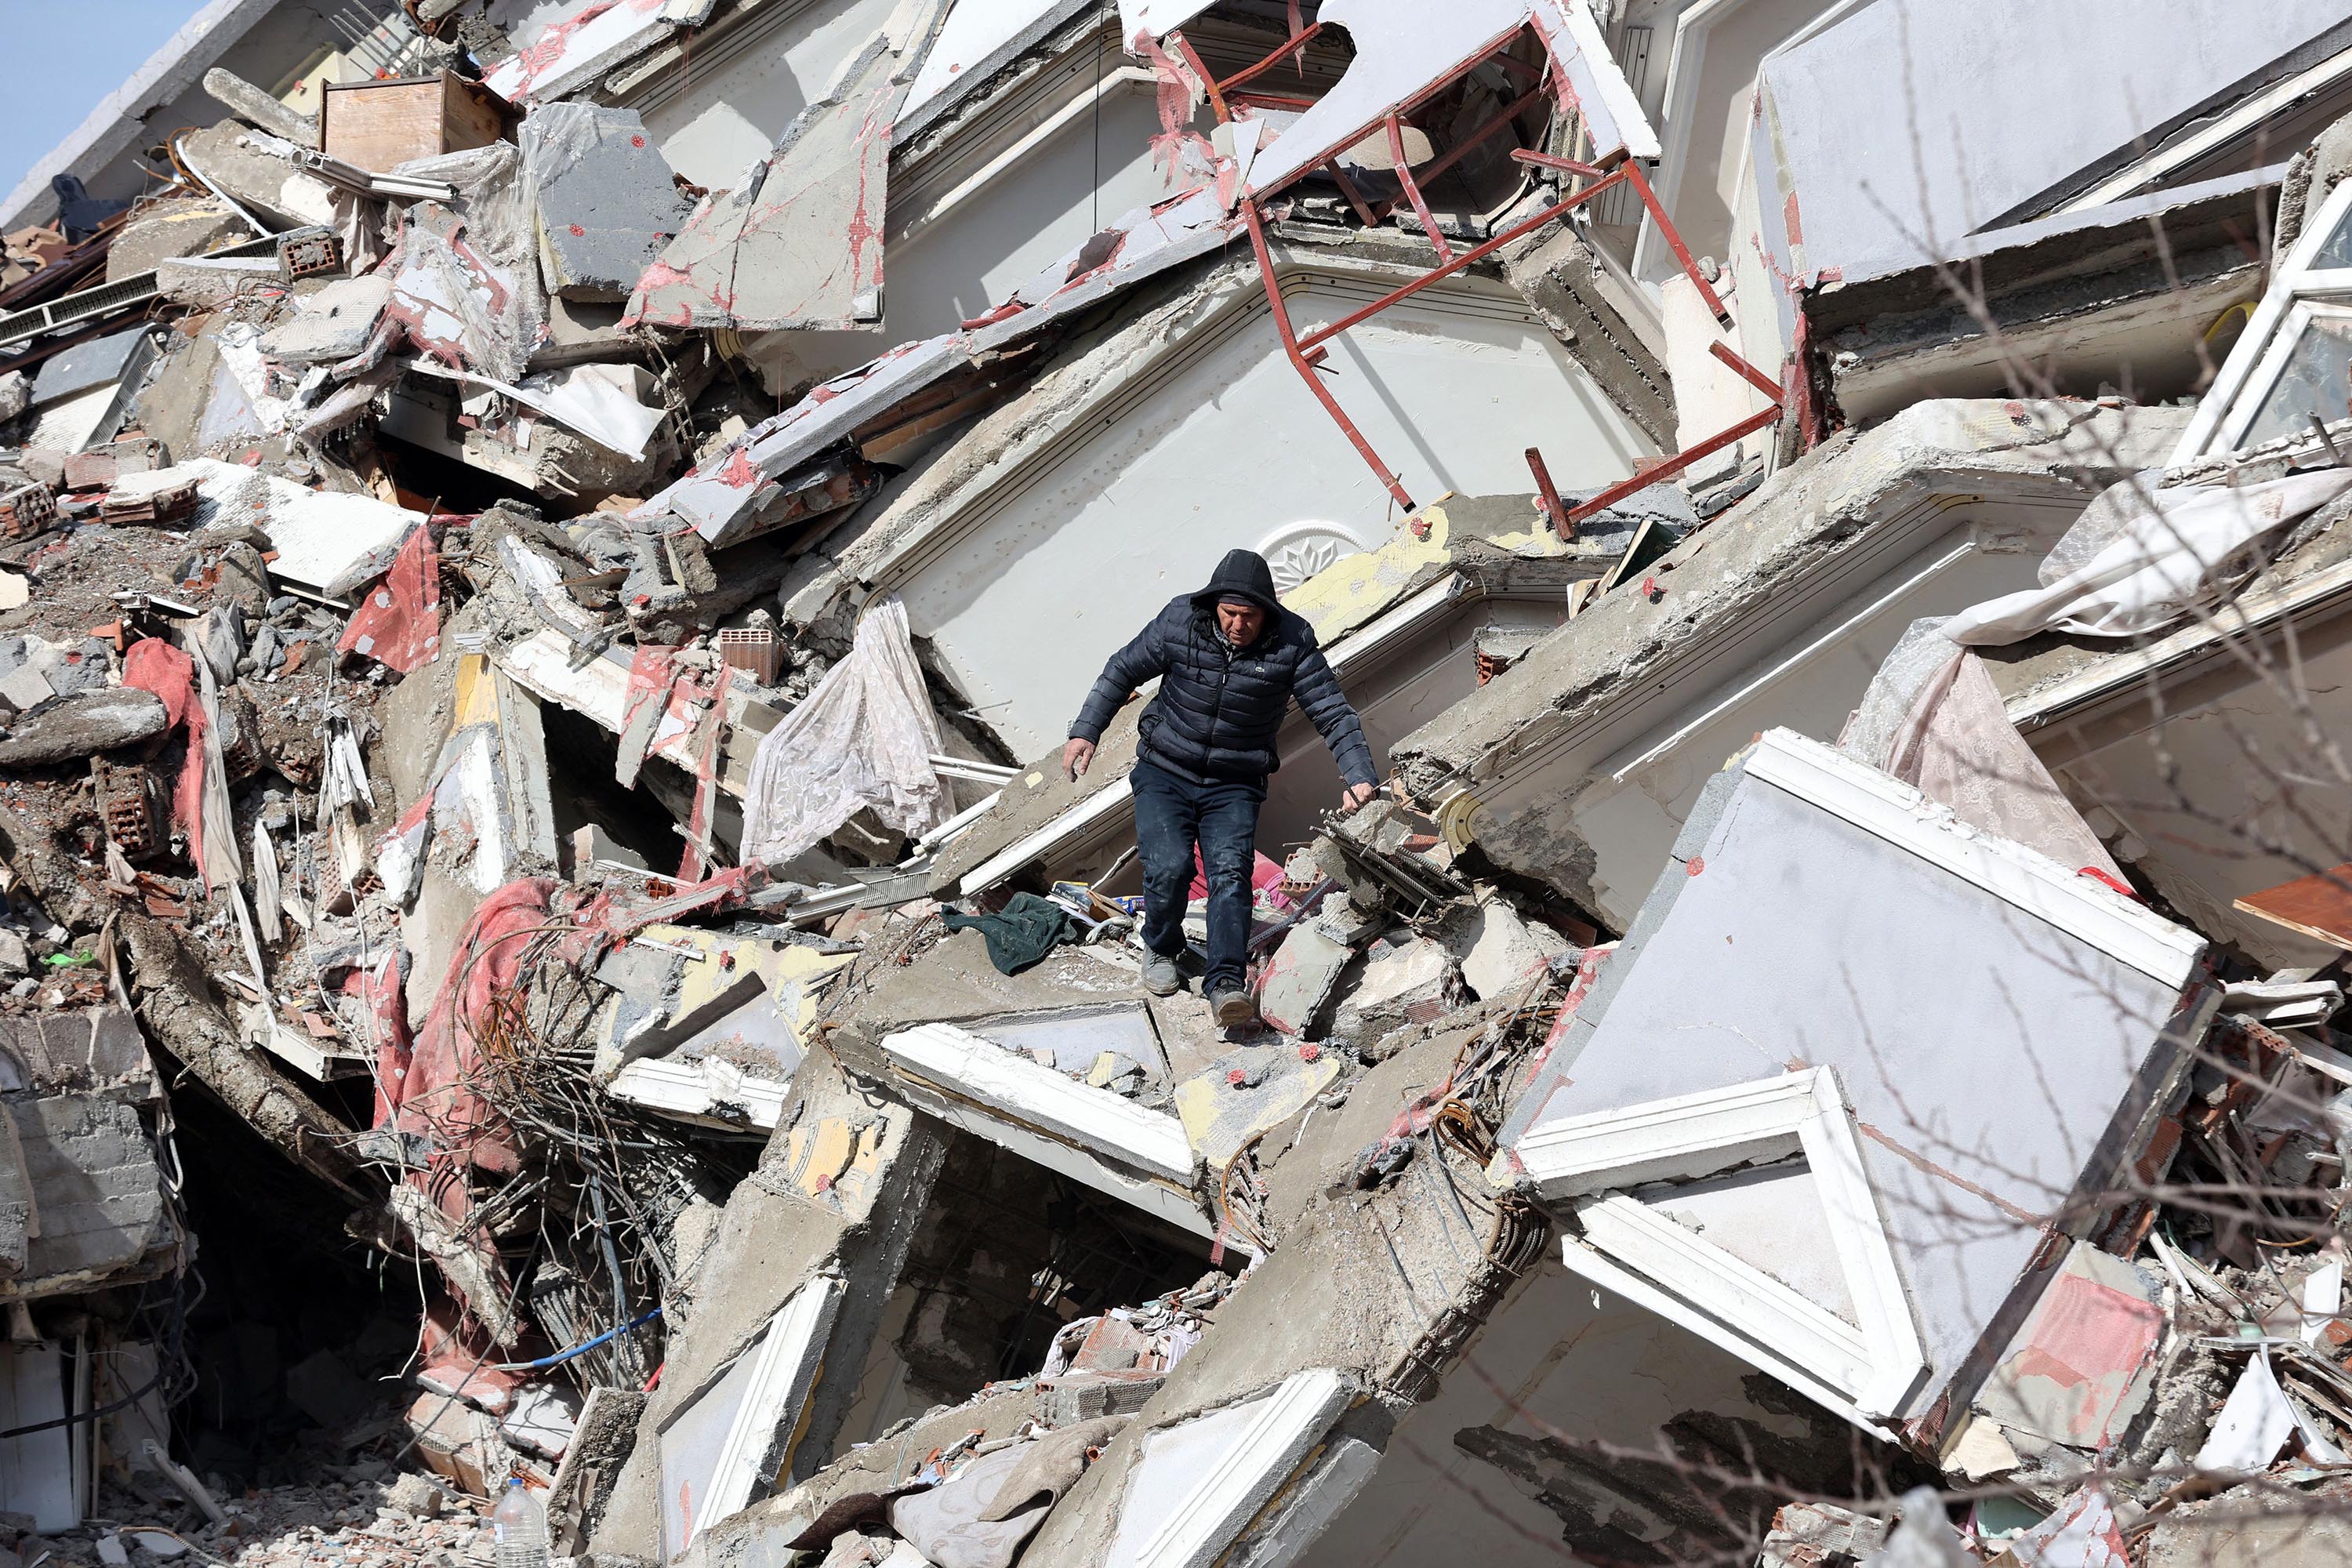 A man makes his way through the rubble of a collapsed building in Kahramanmaras, Turkey, on Tuesday, February 7.